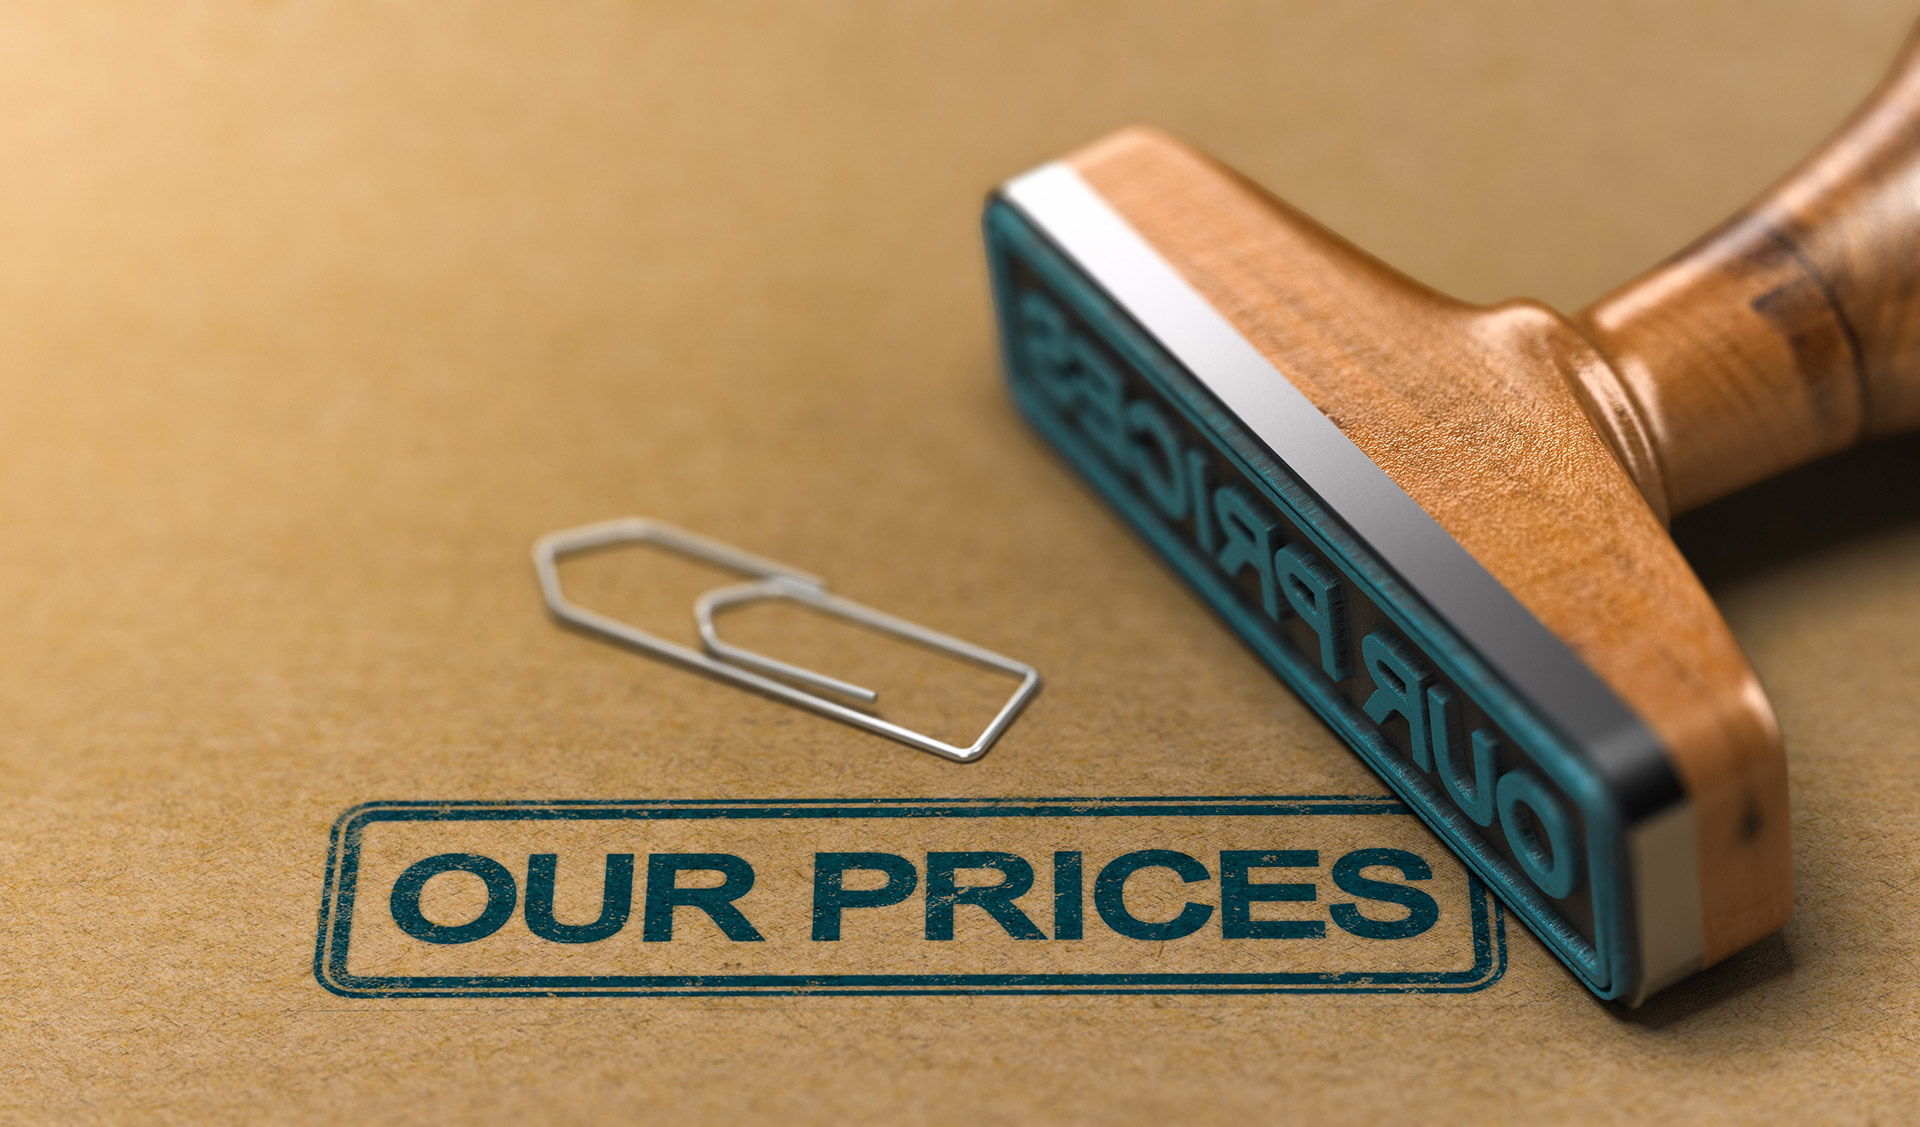 Important Update – New Pricing Model